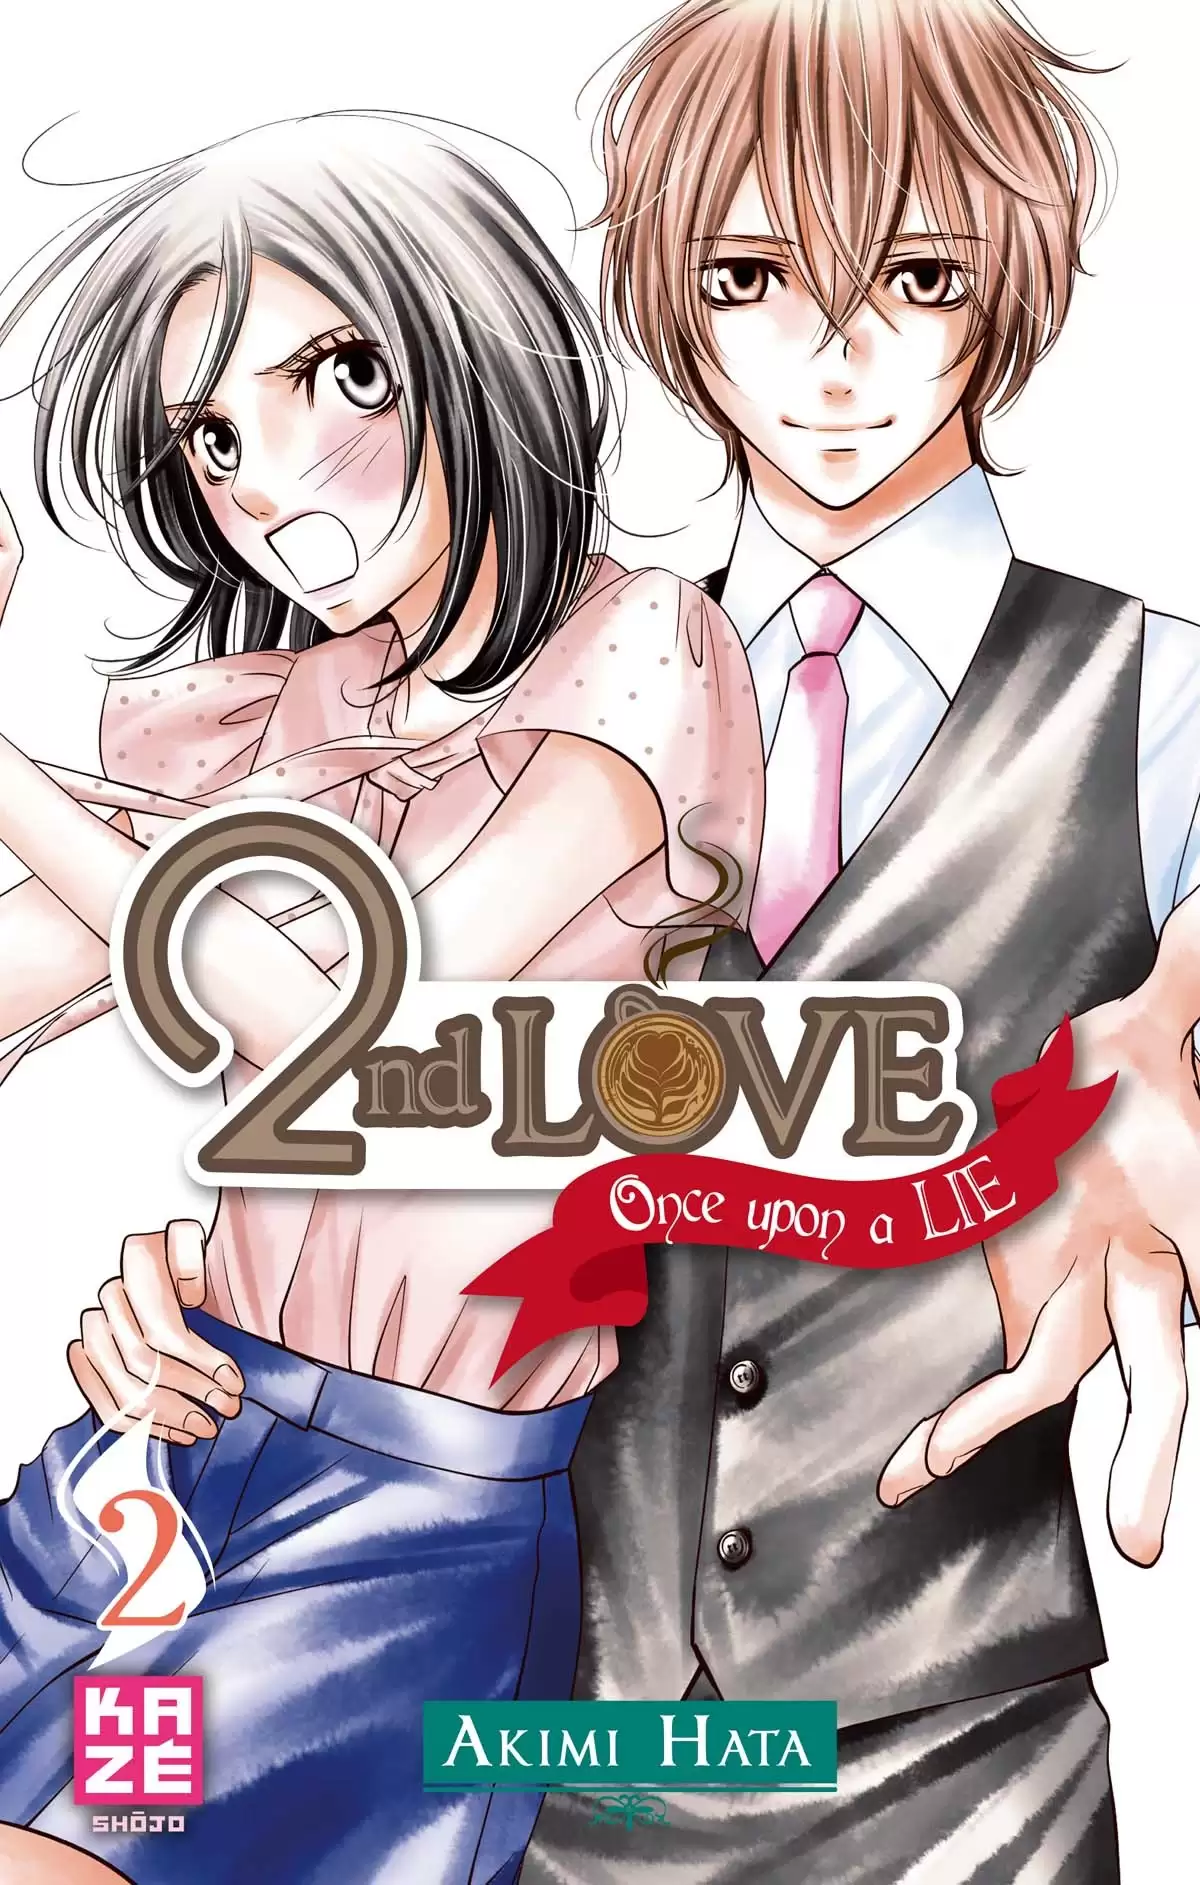 2nd love – Once upon a lie Volume 2 page 1